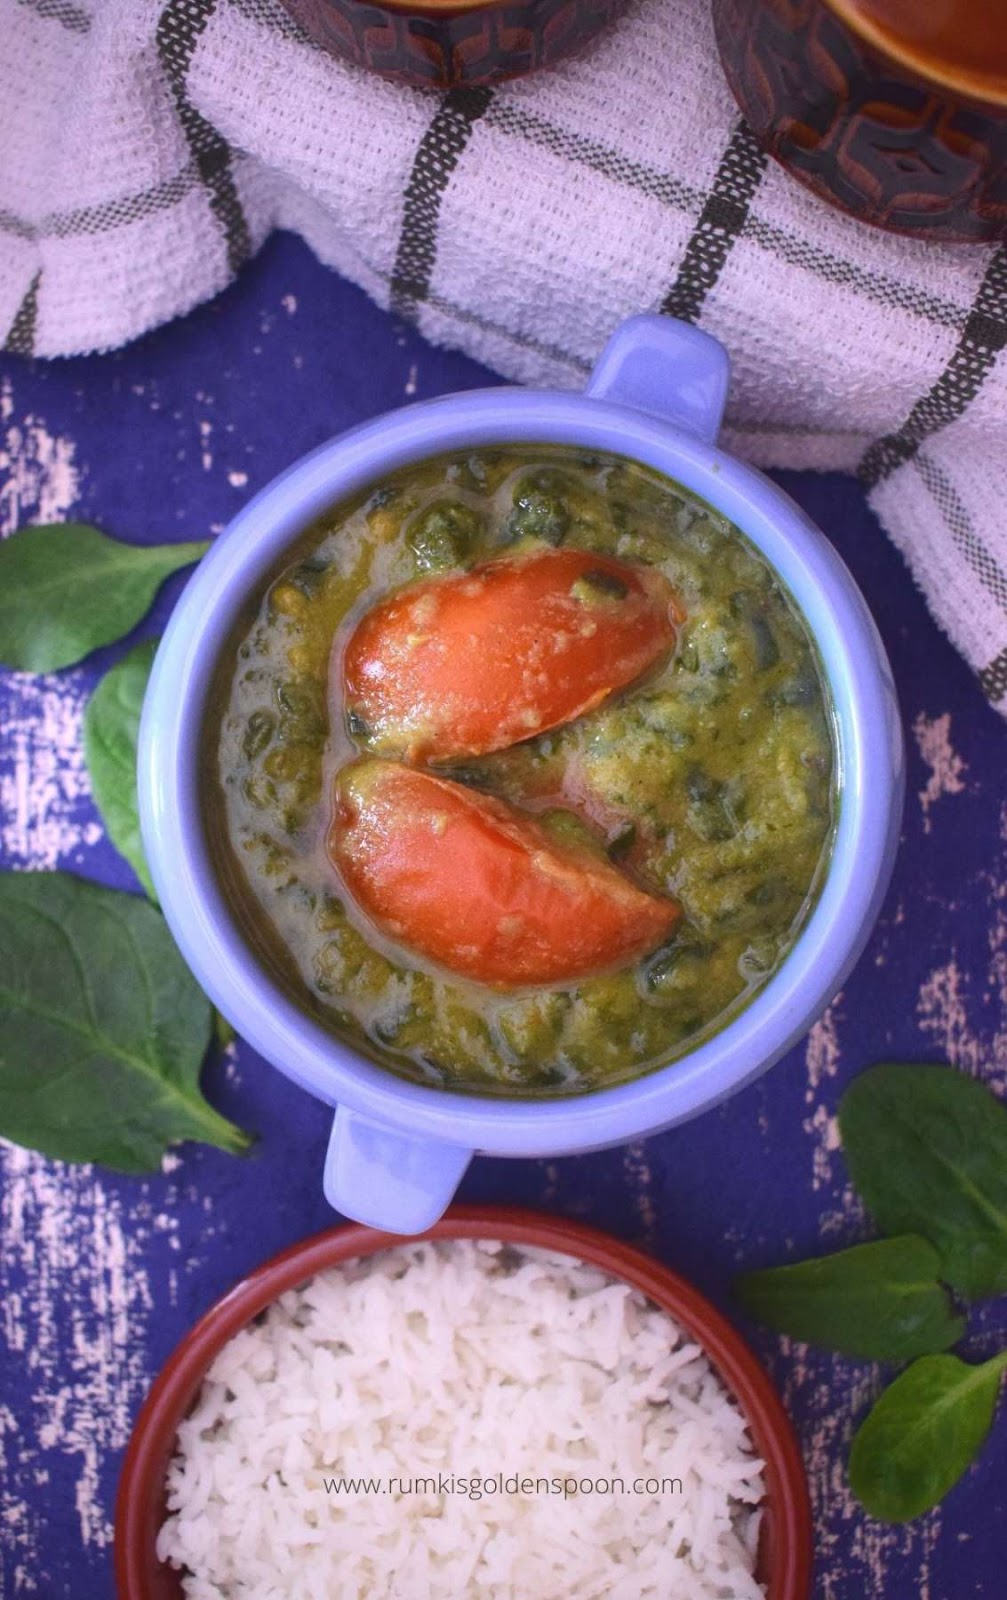 palak curry, spinach curry, palak recipe indian, palak curry recipe, palak ki sabji, palak aloo curry, recipe for palak curry, indian recipe for spinach, spinach recipe indian, palak recipes south indian style, palak sabji gravy, how to make palak curry, palak tomato curry, palak curry for chapathi, how to prepare palak curry, palak curry for rice, spinach curry recipe, recipe for spinach soup indian, spinach vegetable recipe indian, spinach recipes indian vegetarian, how to make spinach curry, palak sabji recipe indian, palak recipes south indian, spinach curry for rice, spinach curry south indian, spinach curry indian style, palak recipes indian style, Rumki's Golden Spoon